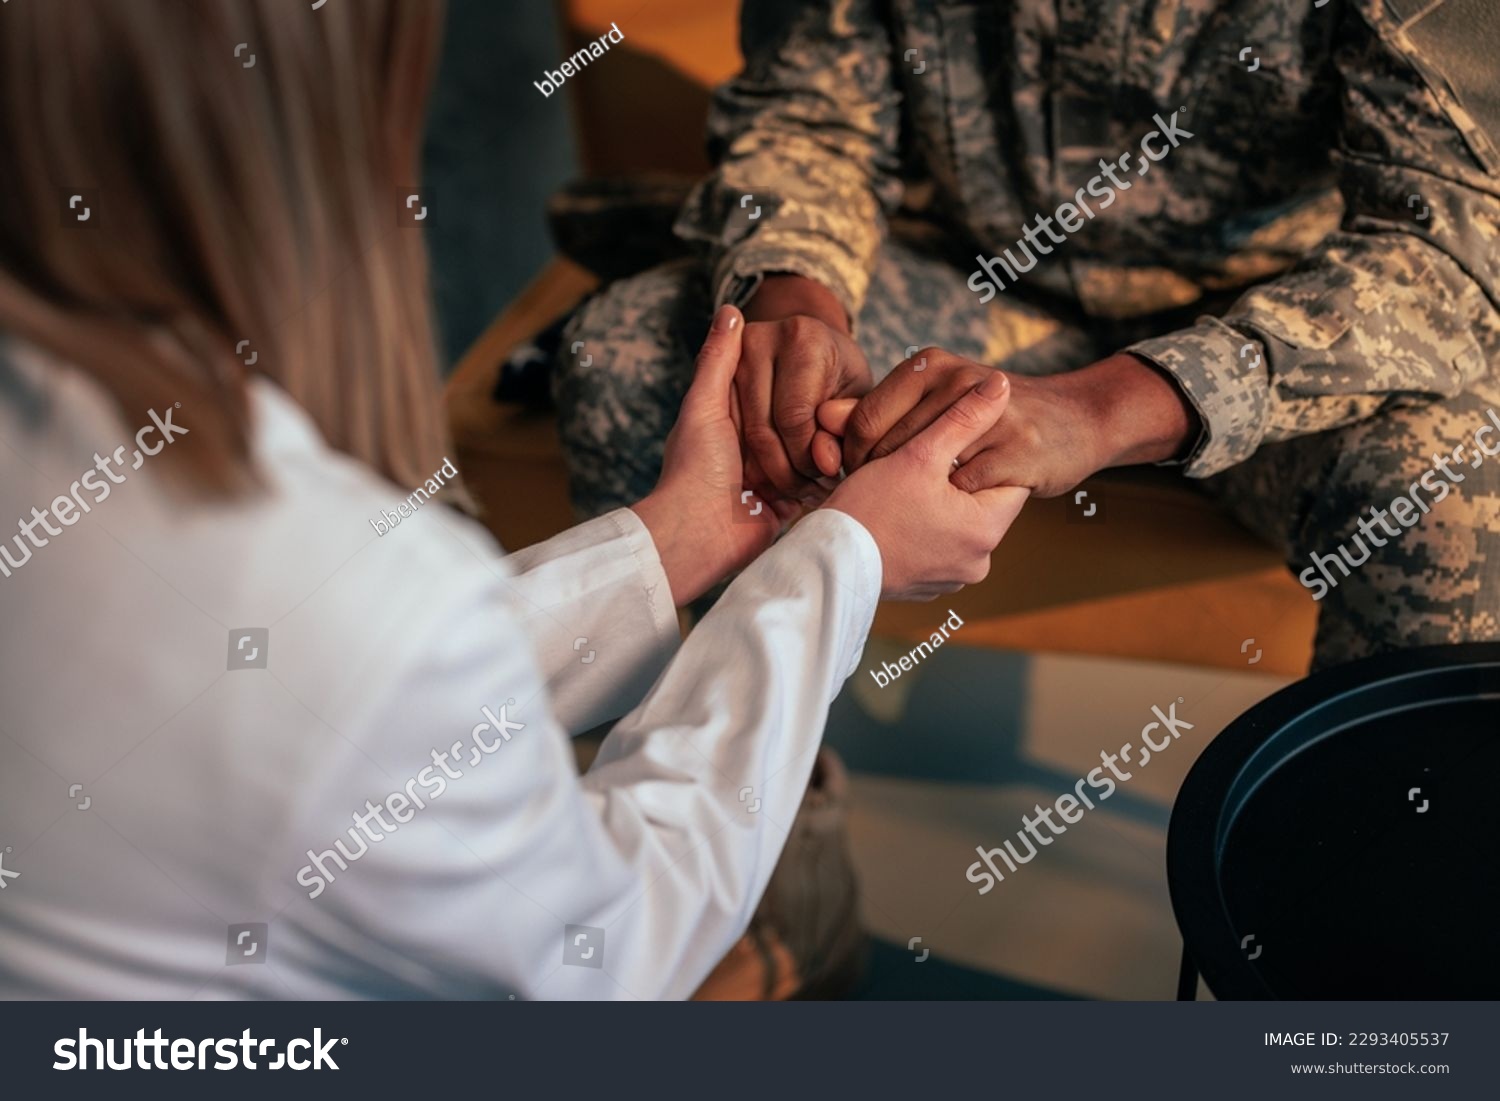 A soldier is in therapy at the psychologist office, holding hands with her in the process of rehabilitation. #2293405537